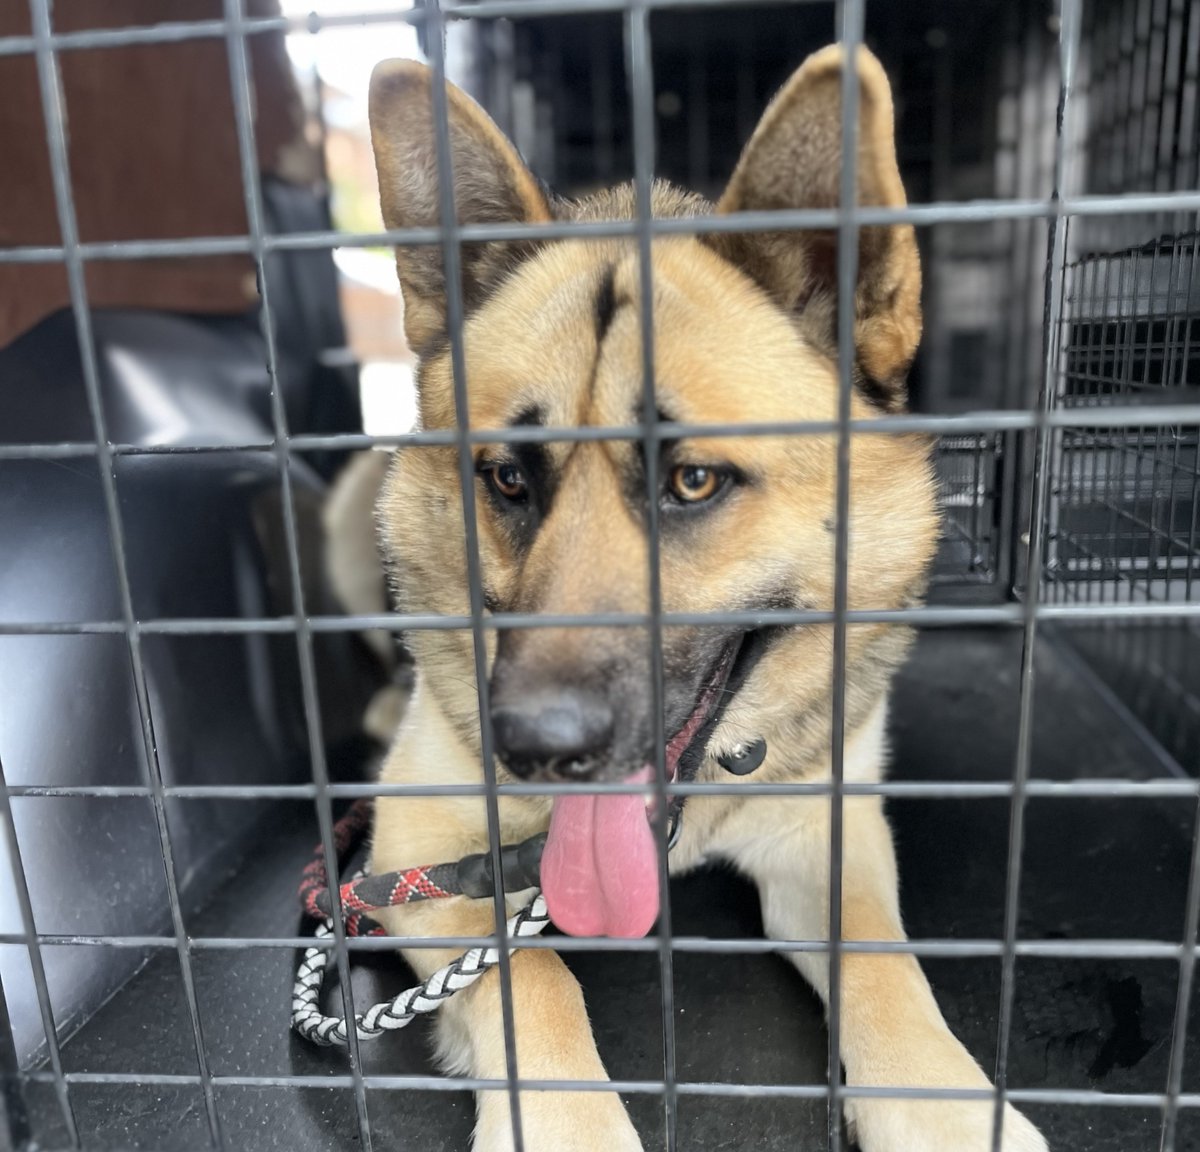 Please retweet to HELP FIND THE OWNER OR A RESCUE SPACE FOR THIS STRAY/ABANDONED DOG FOUND #GREENWICH #LONDON #SE18 #UK  Adult, male German Shepherd, no chip, found APRIL 16. Now in a council pound for 7 days, he could be missing or stolen from another area. Please share widely.